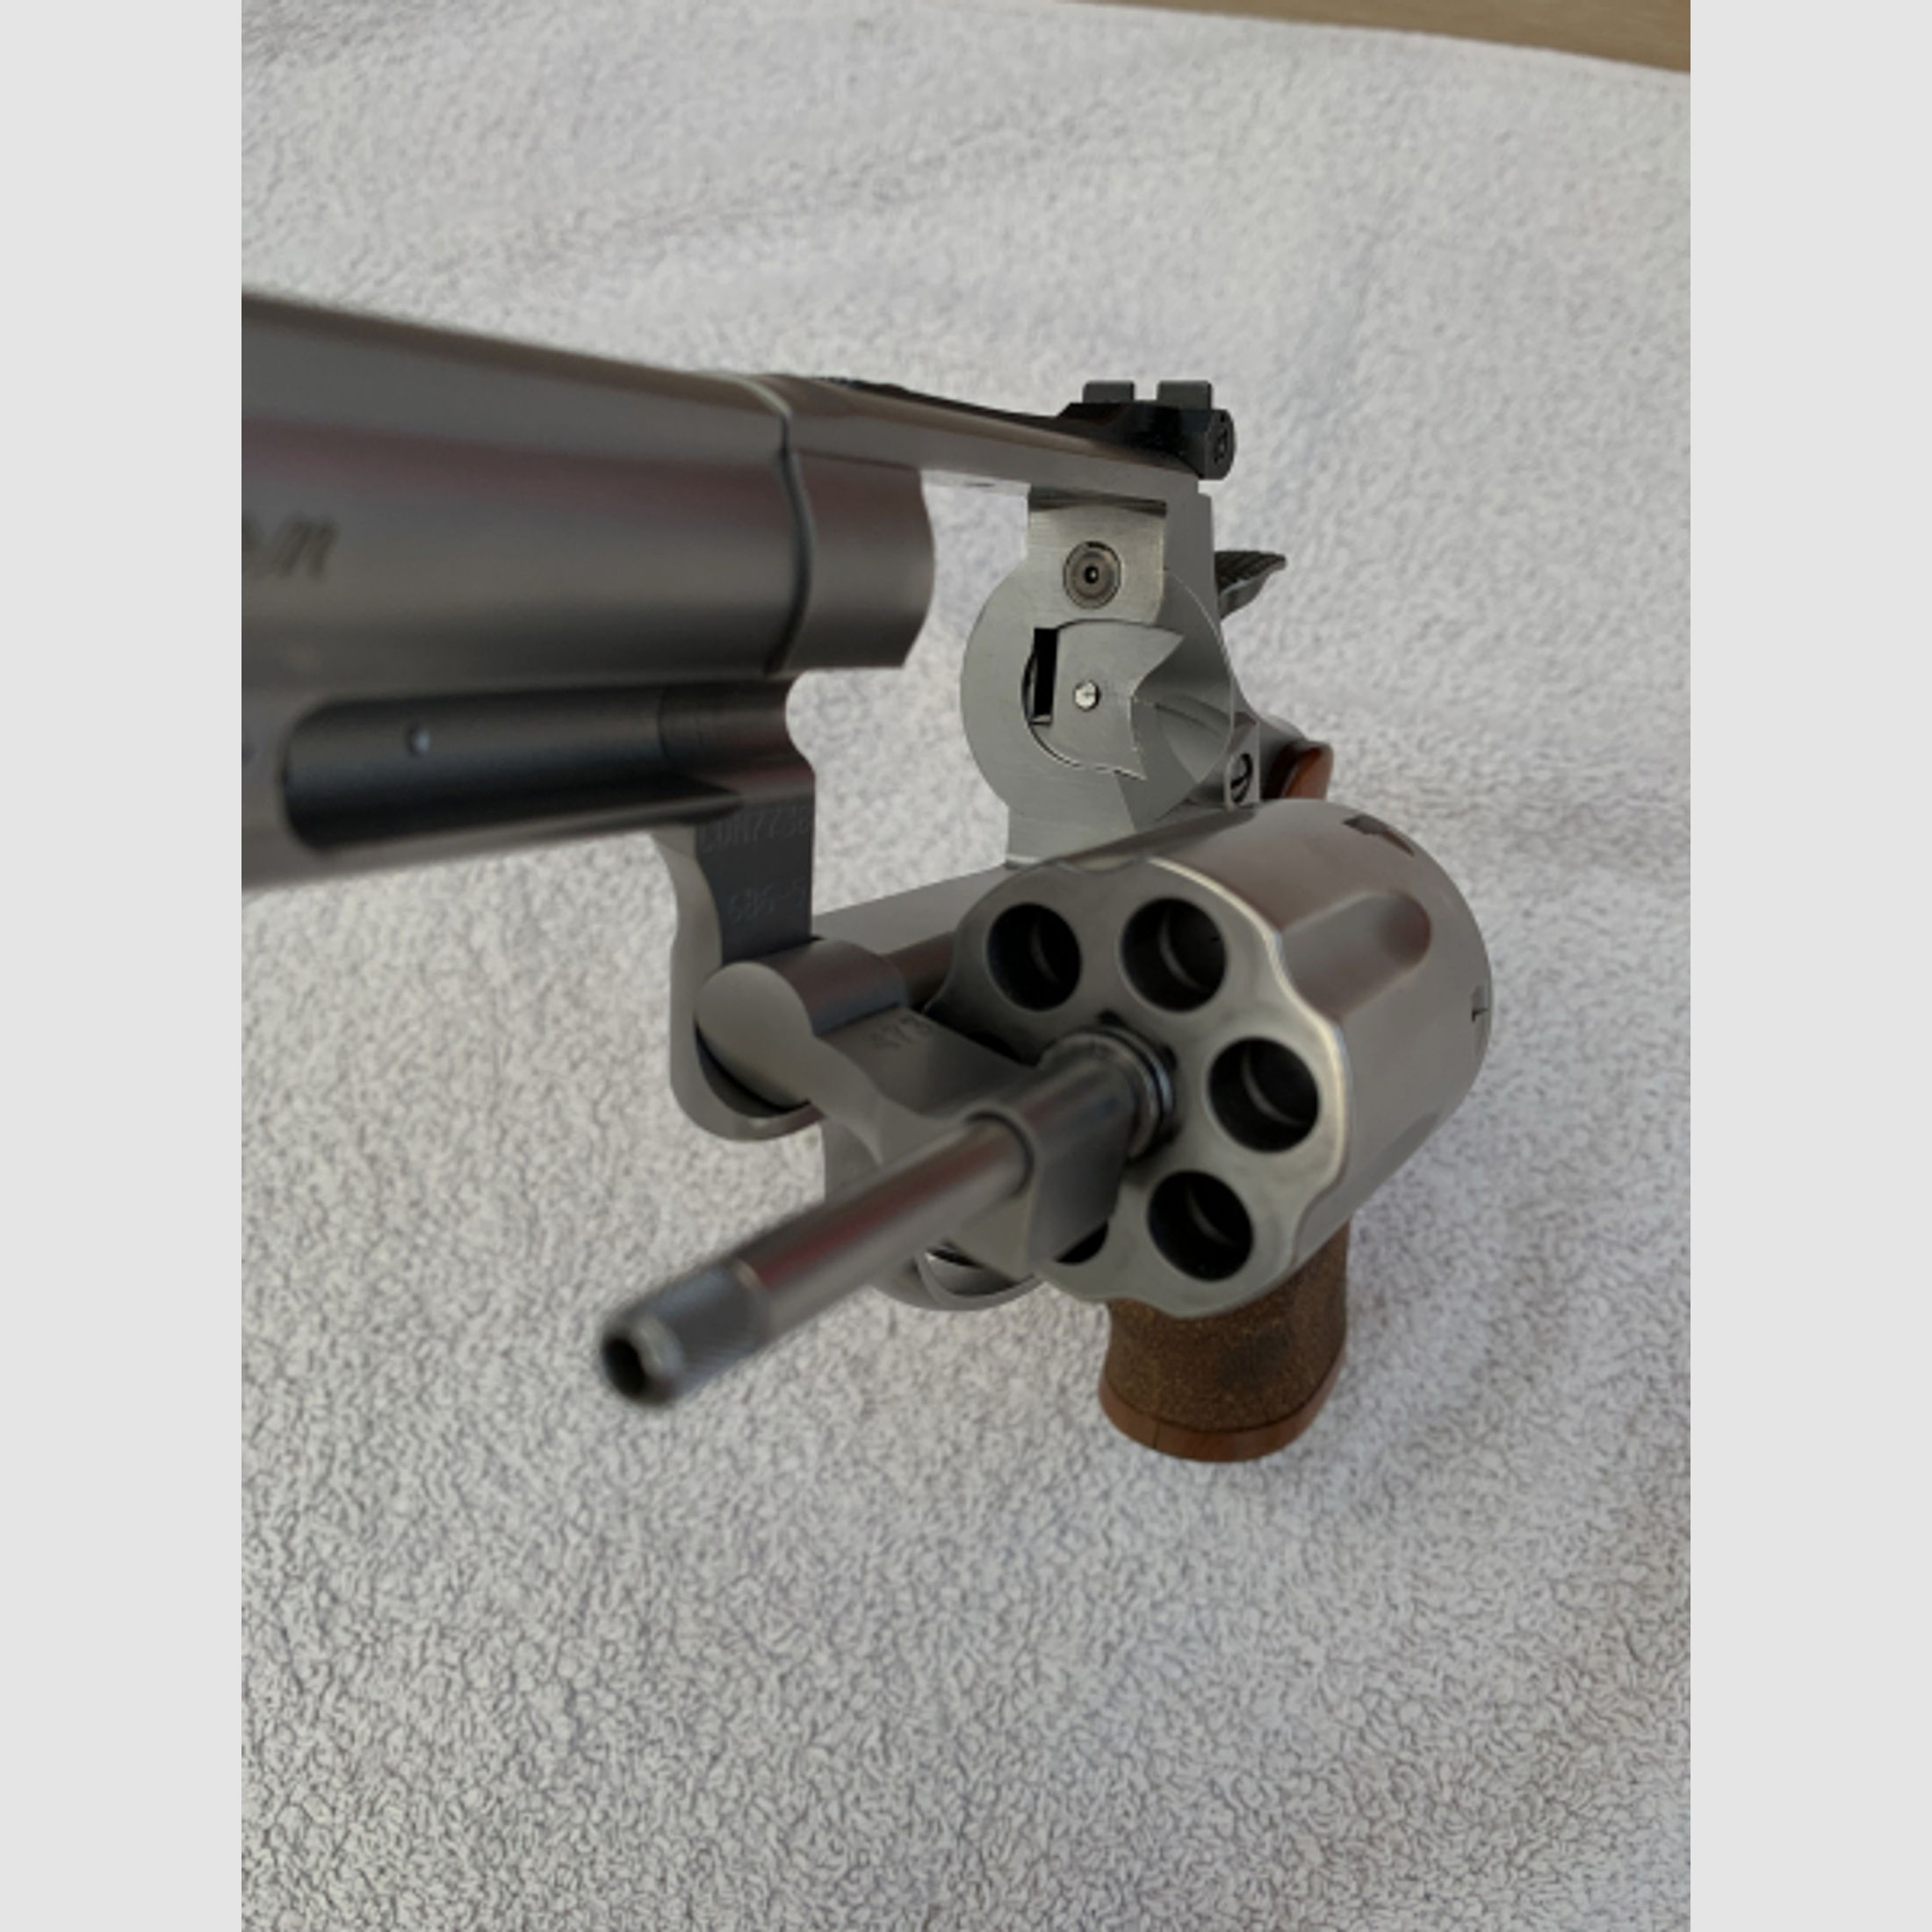 Smith & Wesson Mod. 686 Target Champion